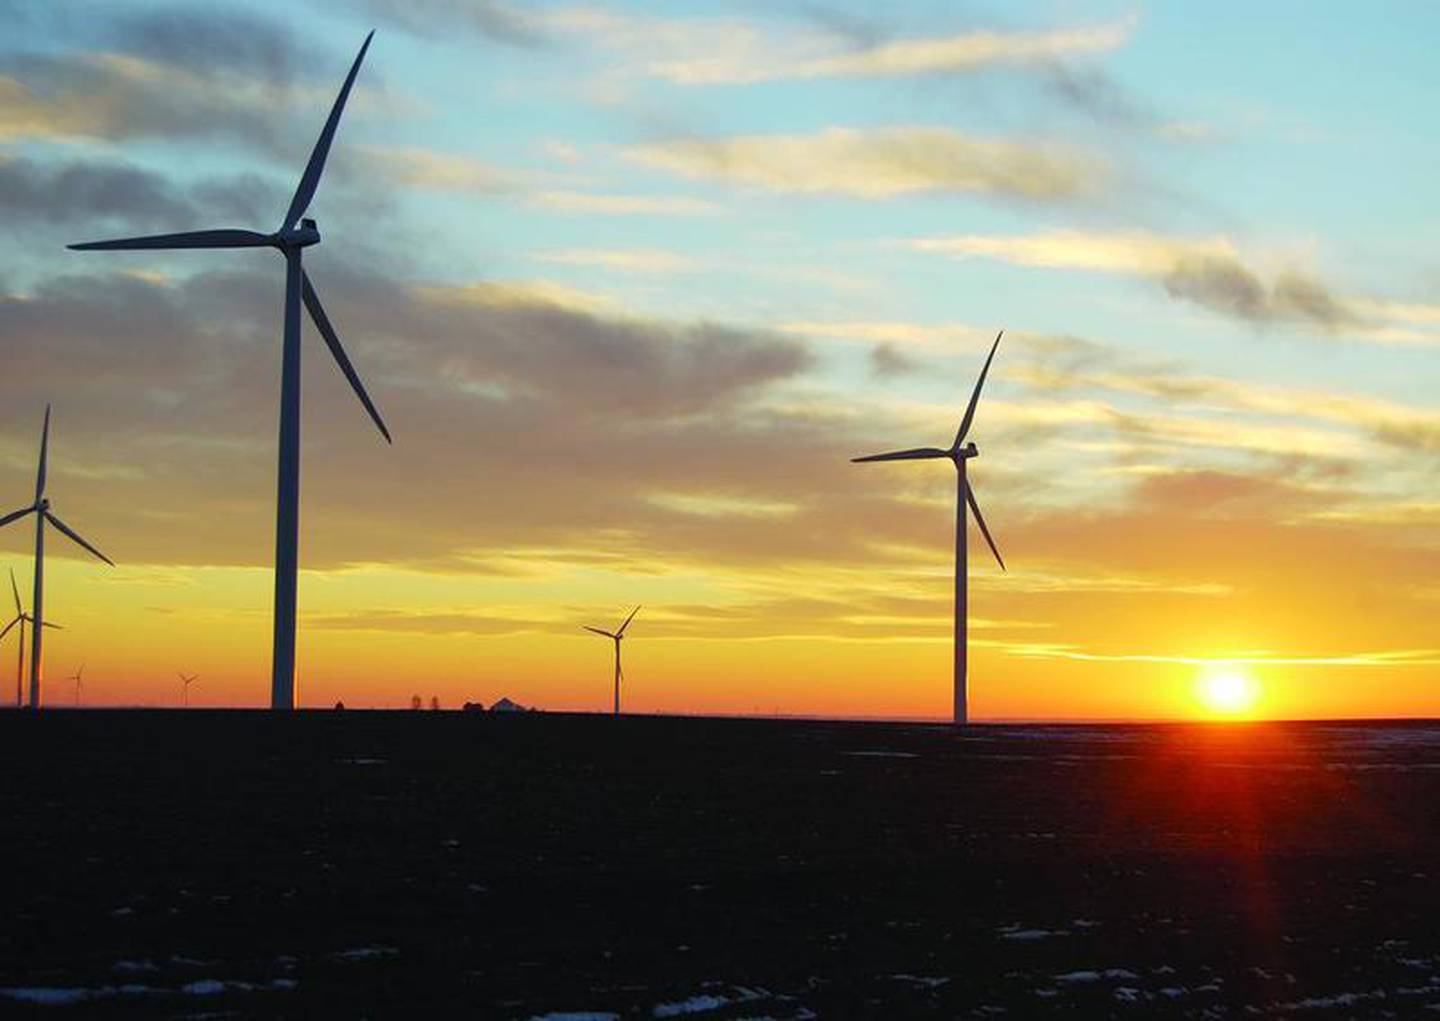 The northern part of Bureau County will start to look more like the southern part, shown here, now that work has begun on building 106 turbines, part of the Walnut Ridge Wind Farm project.